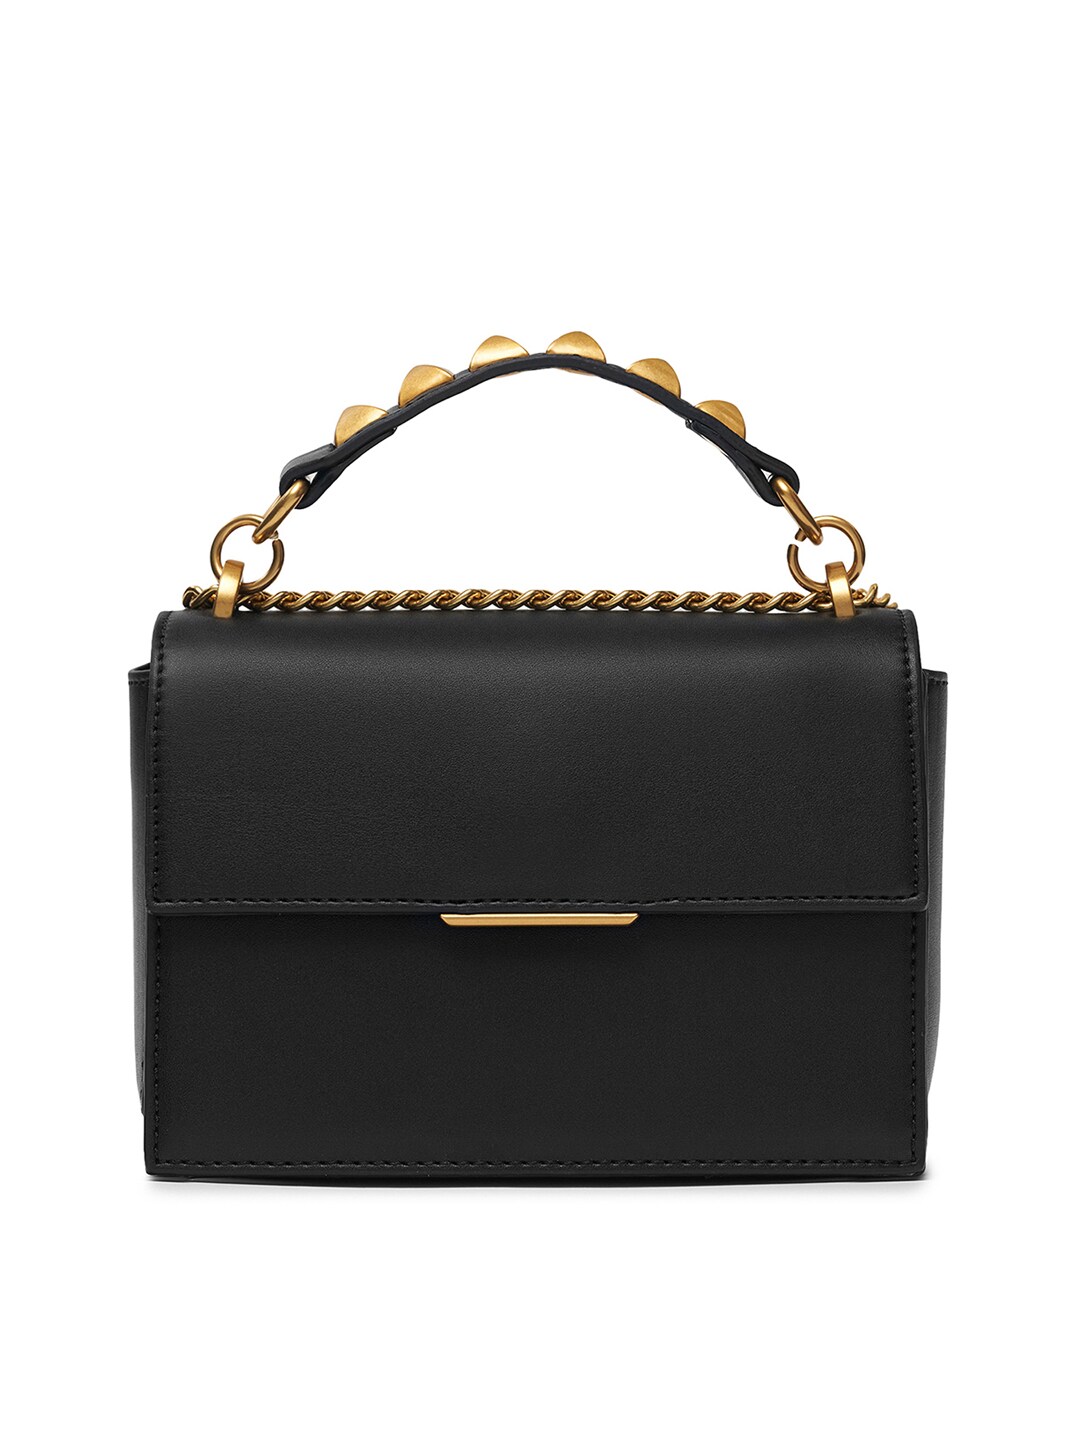 MIRAGGIO Black Structured Sling Bag with Embellished Top-Handle